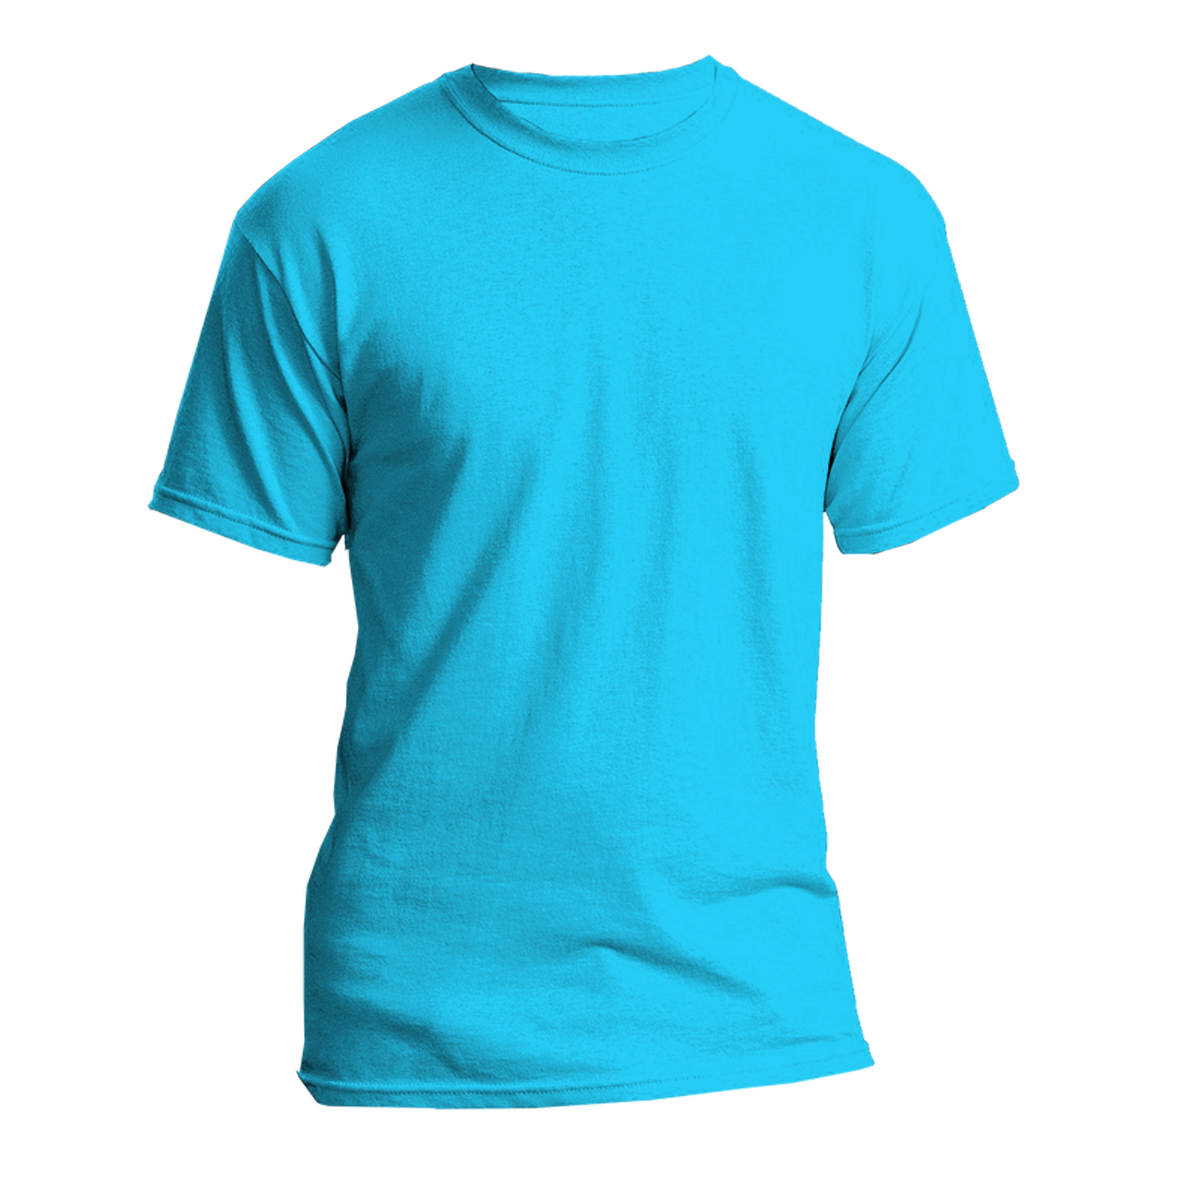 Sky Blue Round Neck Tshirt - Branding & Printing Solutions Company in ...